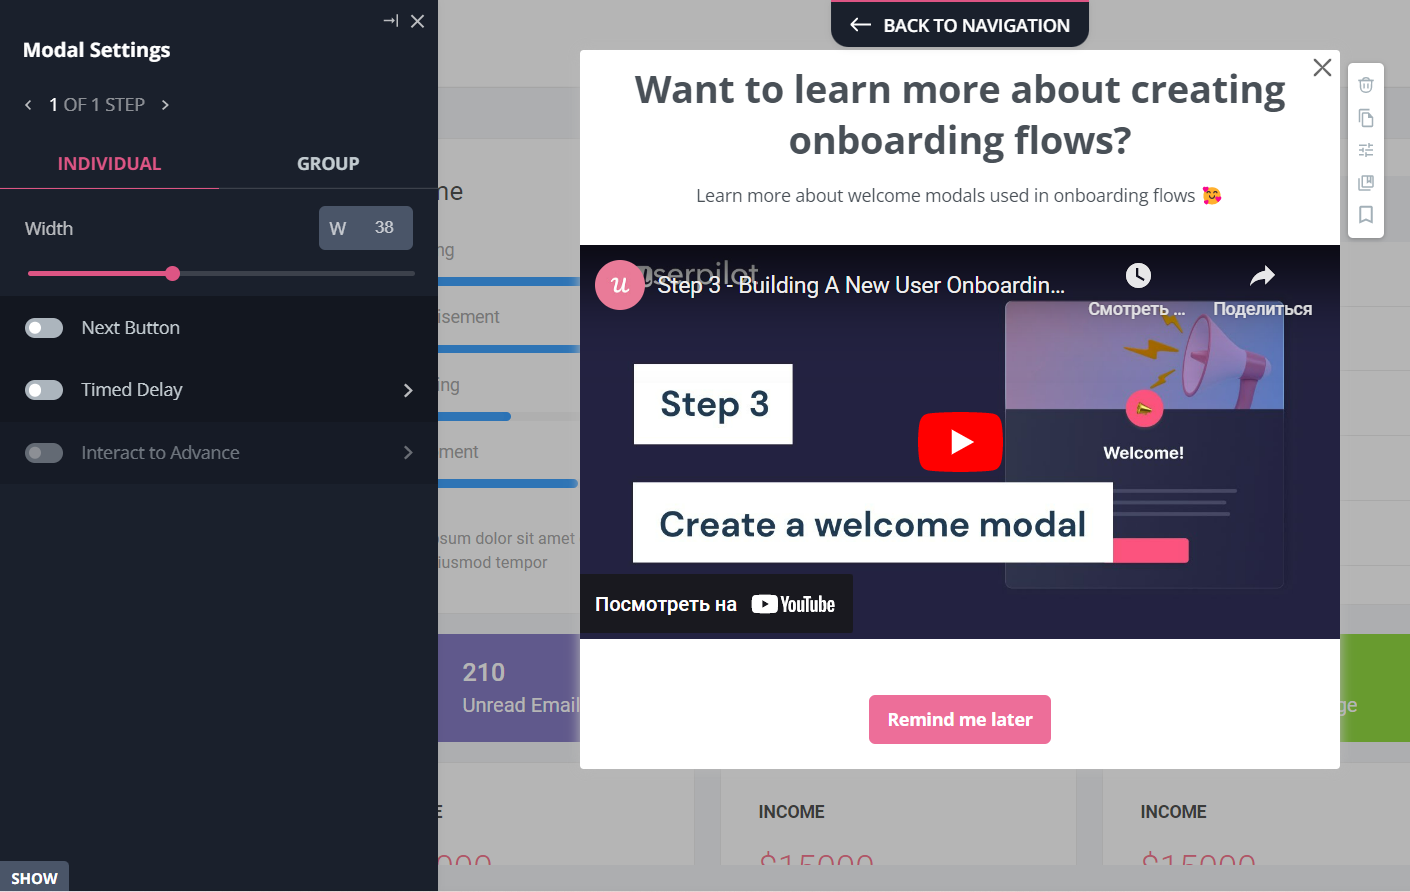 Use visuals in your modal design